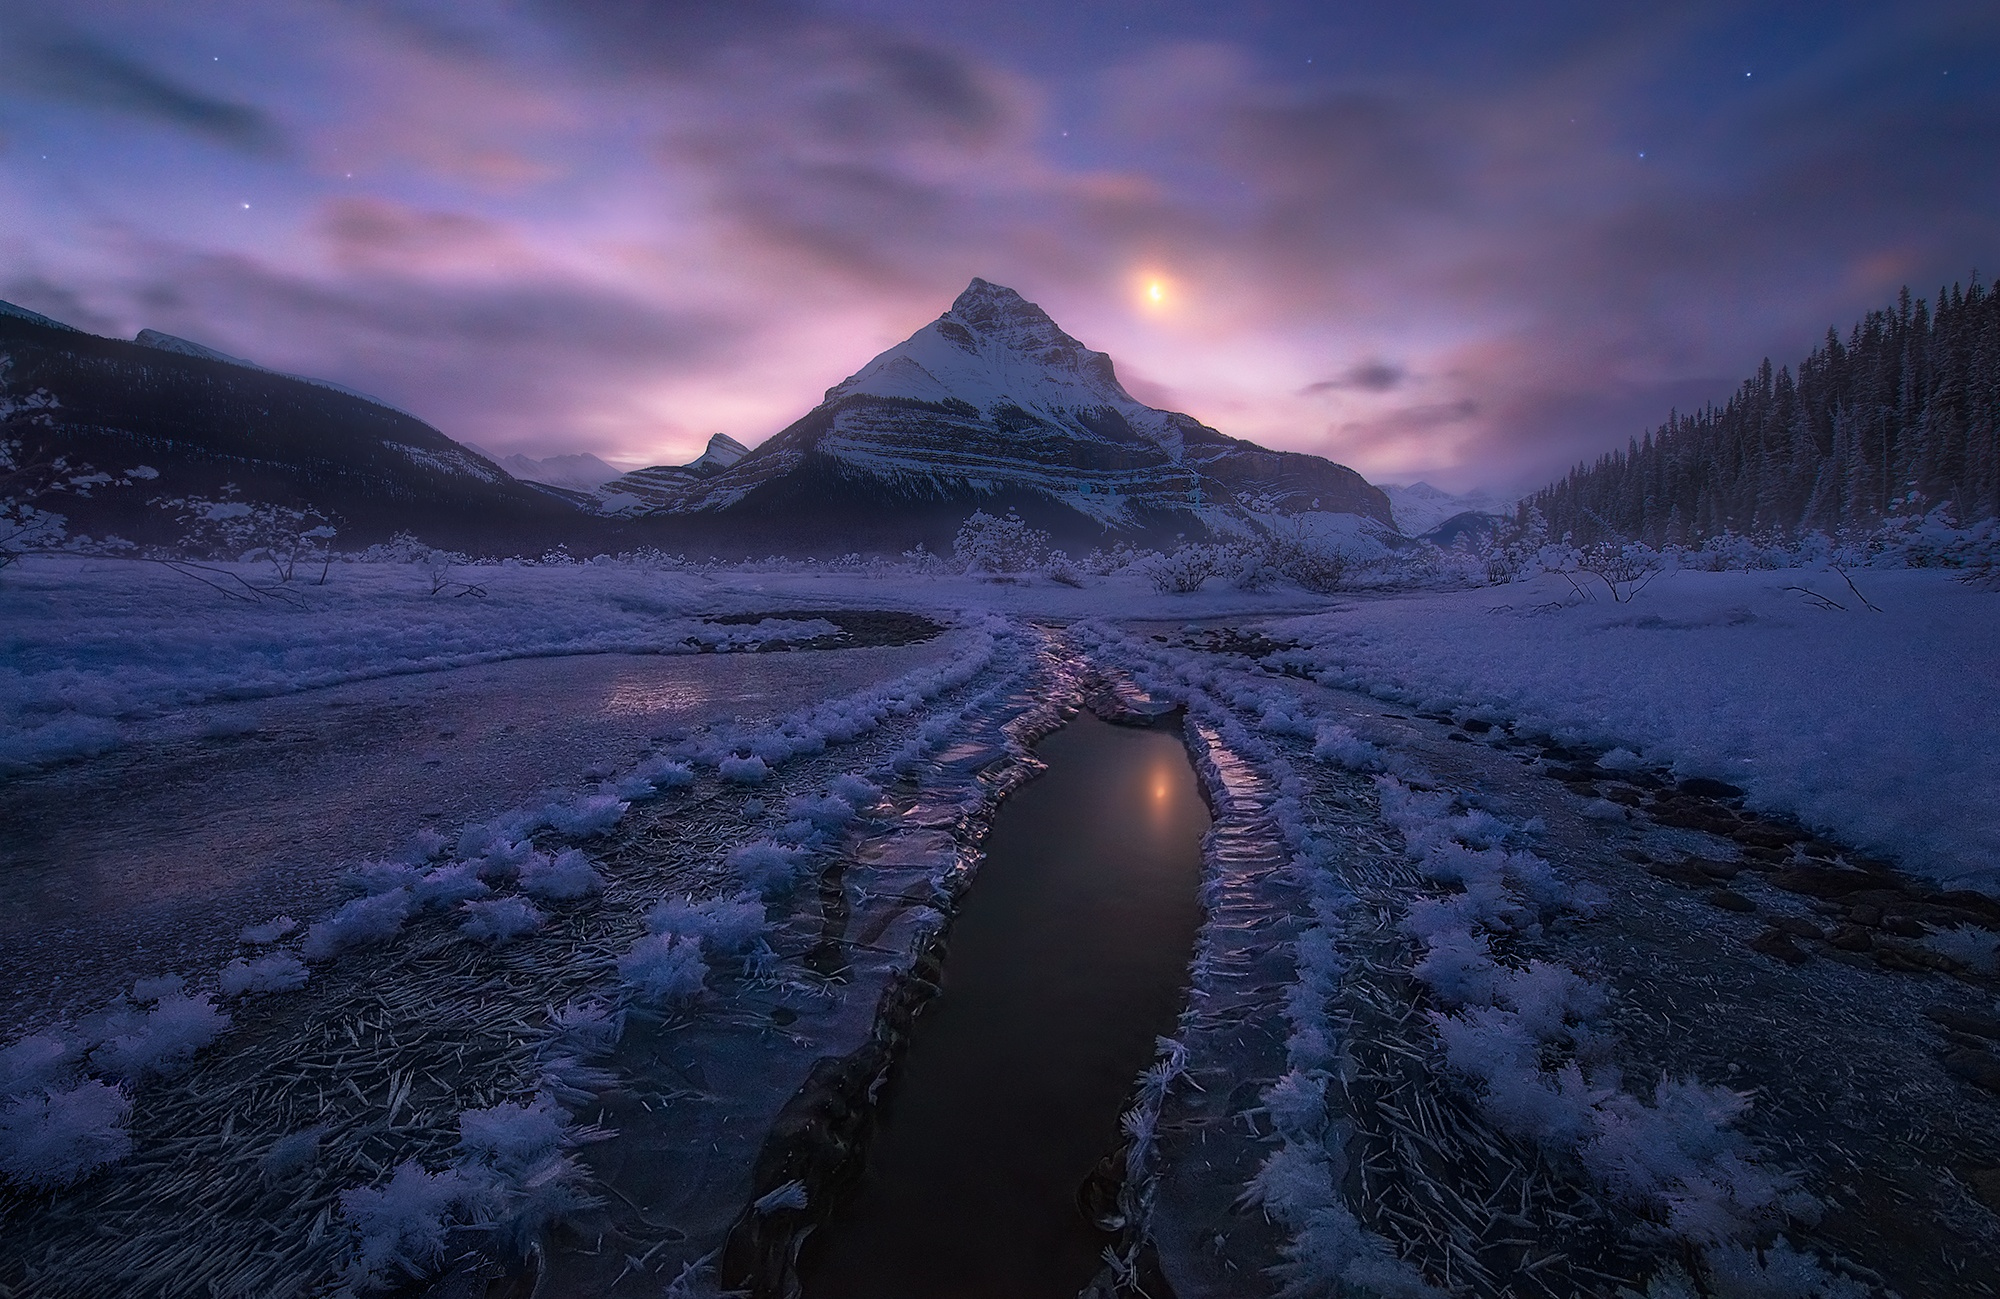 Alberta Canada Canadian Rockies Frost Ice Landscape Moonlight Mountain Nature Night Snow Water Winte 2000x1299